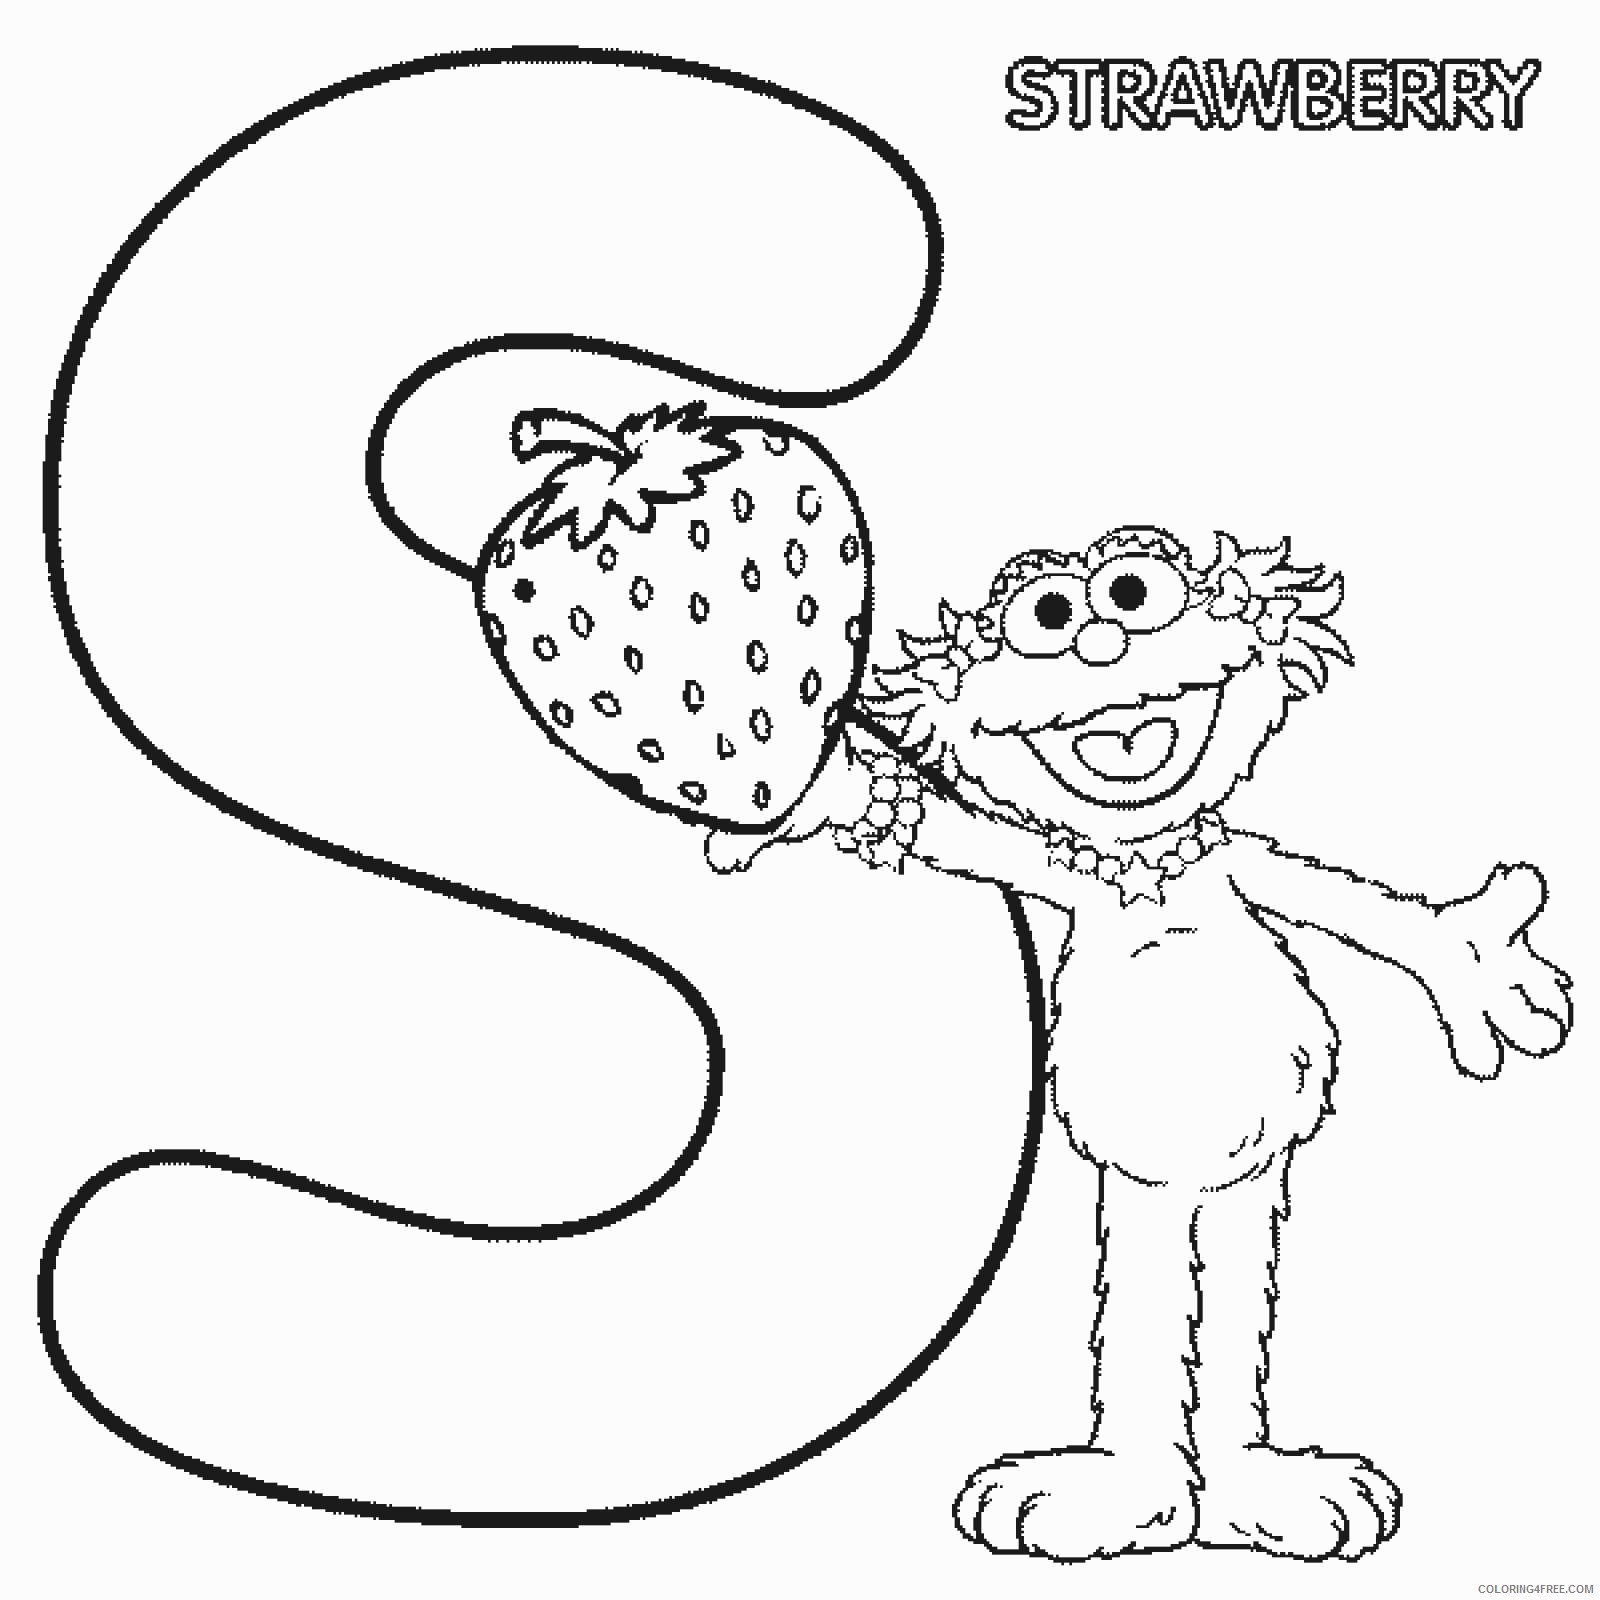 abc coloring pages s for strawberry Coloring4free